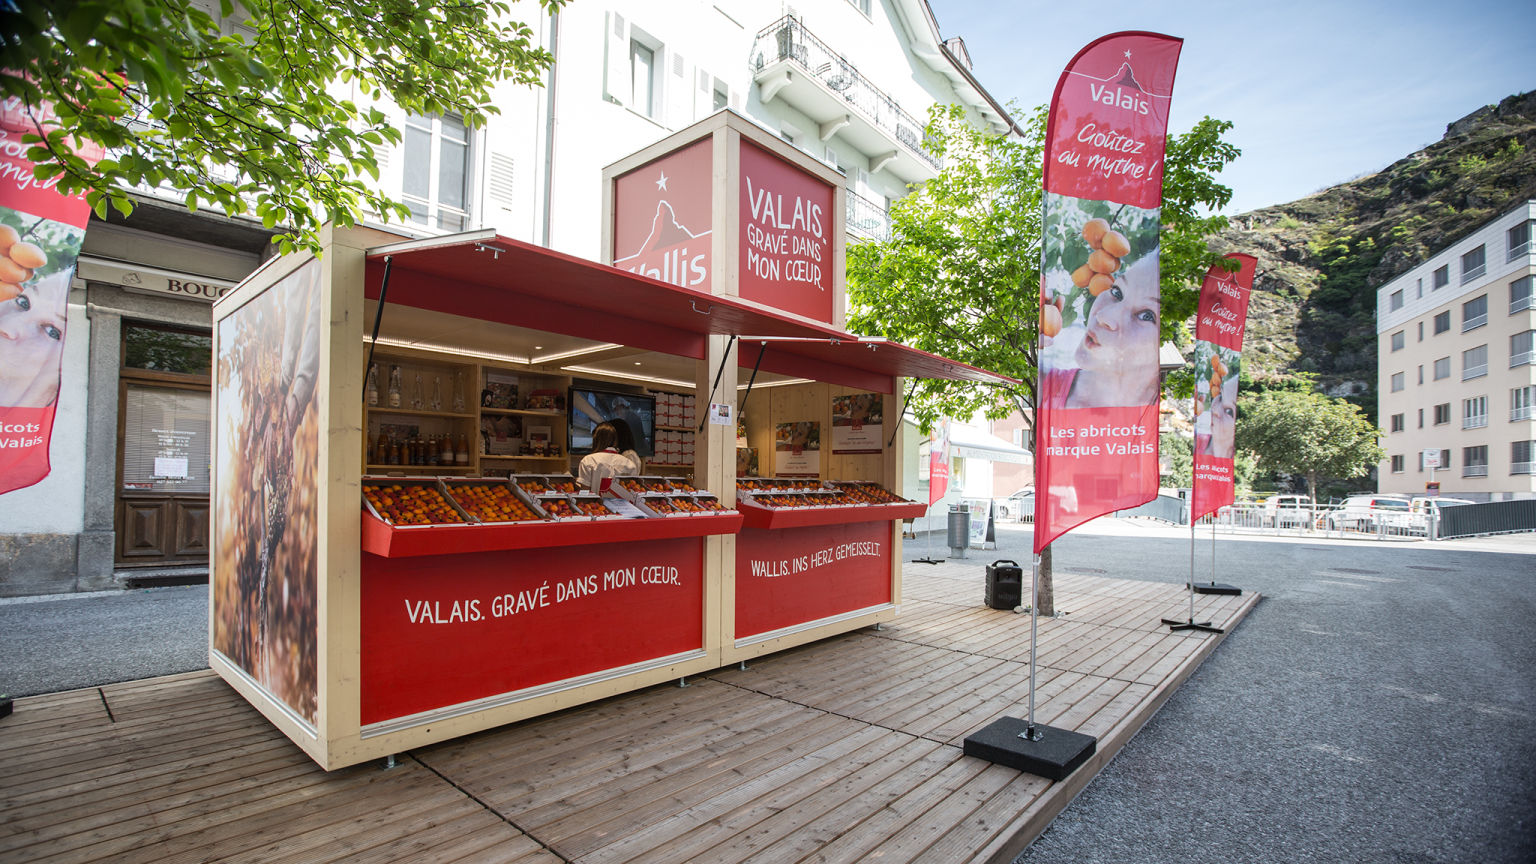 The apricots stand of Valais brand at Place du Midi in Sion.